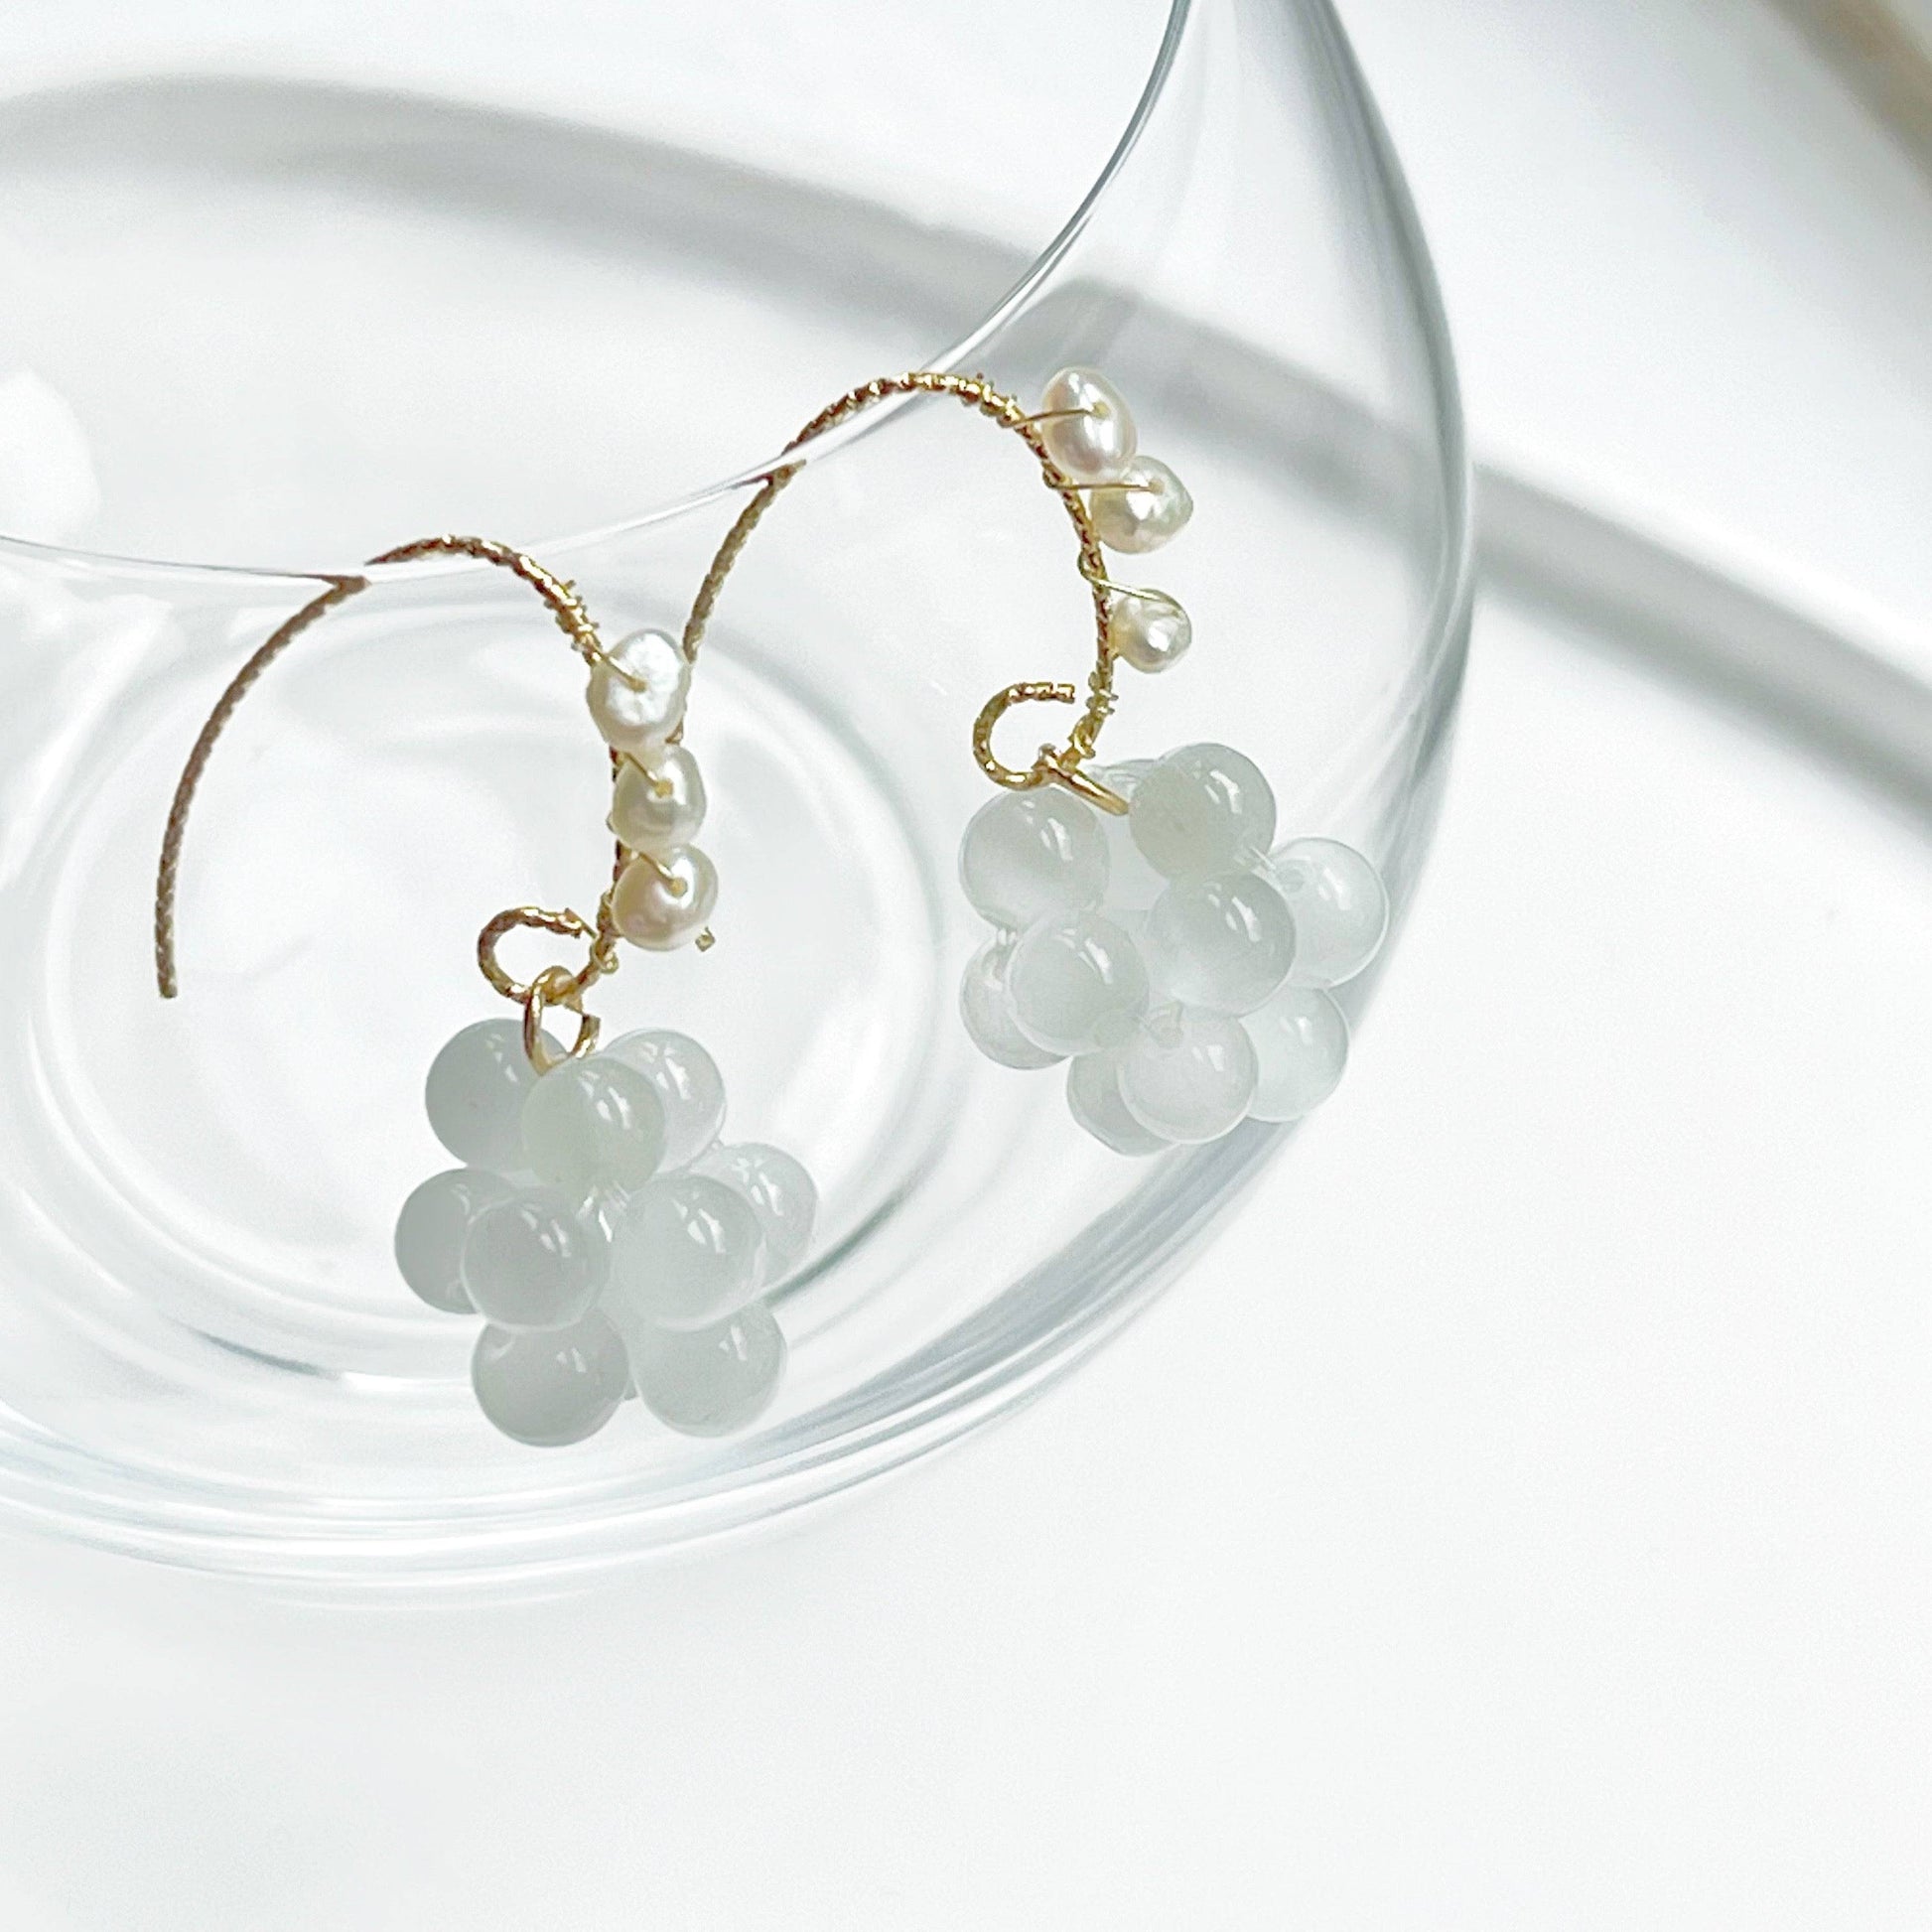 White Cats Eye Stone Beads and Pearls Drop Earrings-Ninaouity